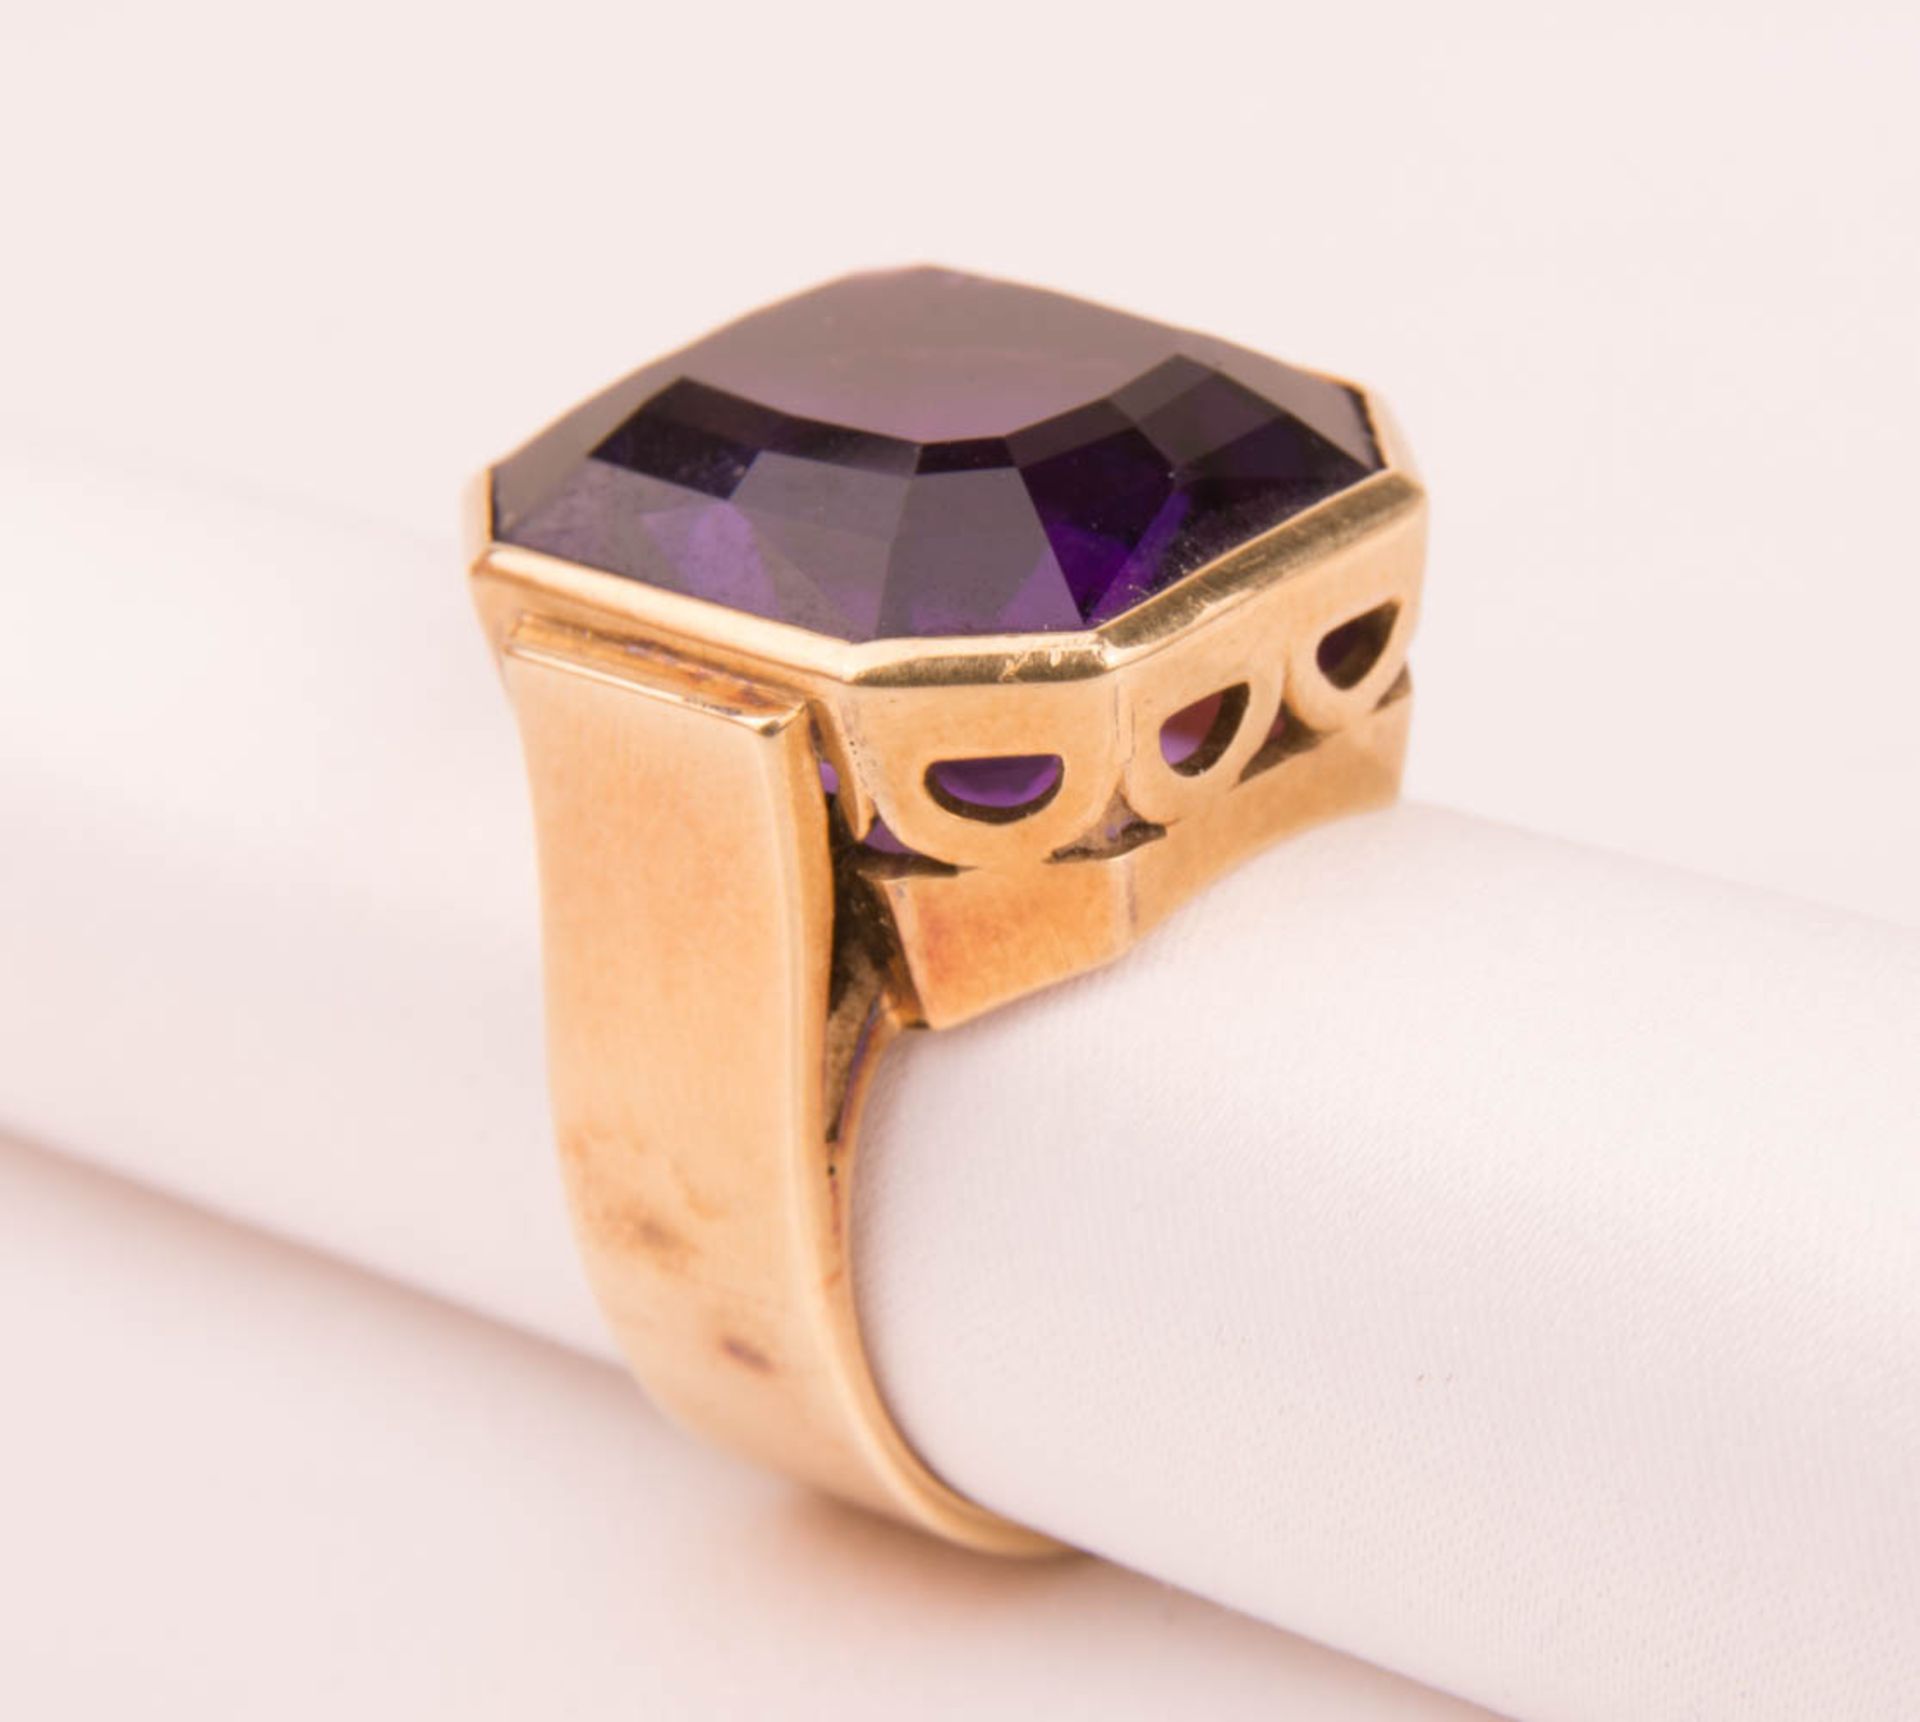 Impressive ring with large amethyst, 585 yellow gold. - Image 2 of 6